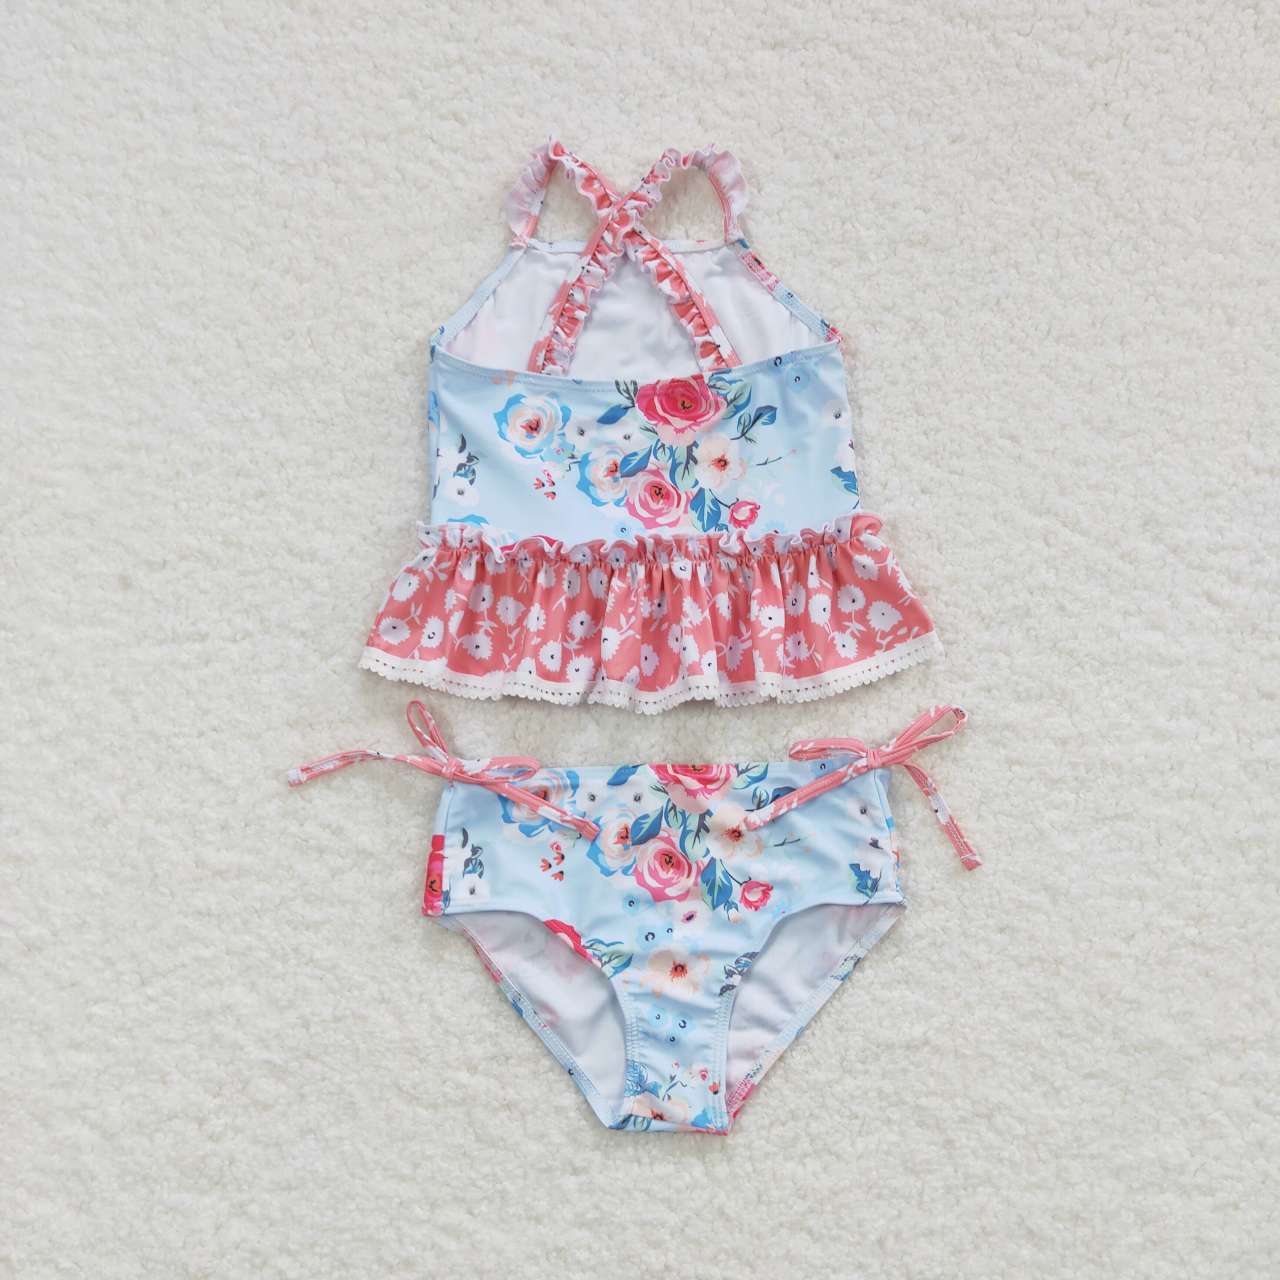 Baby Girls Flower Summer two pieces swimsuits